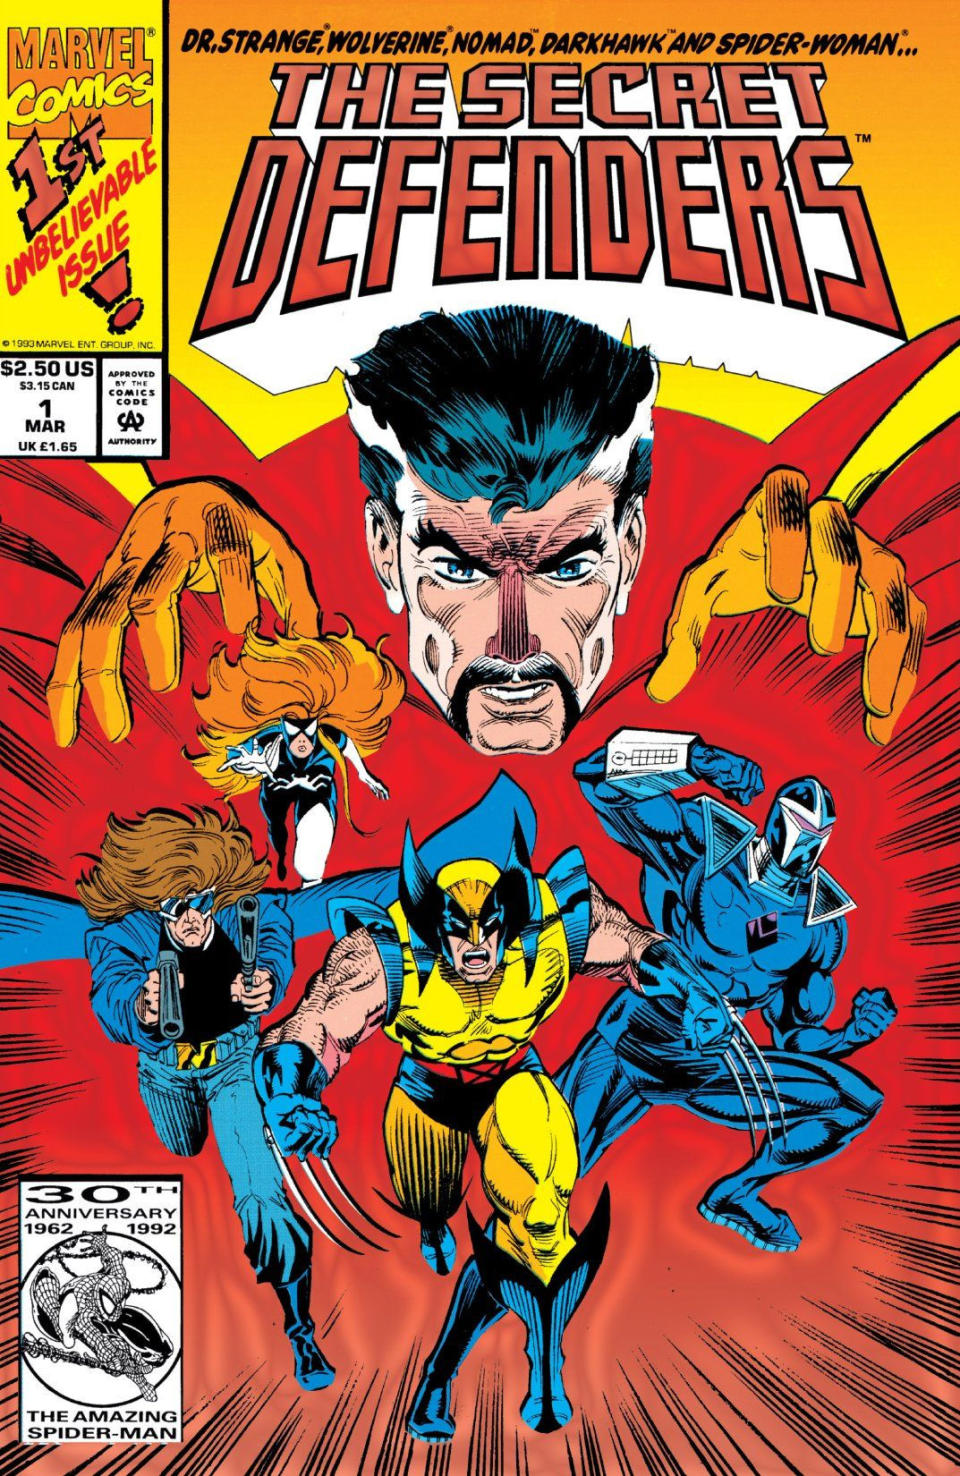 The cover for Secret Defenders #1 shows Doctor Strange controlling a team of edgy heroes like a puppet master